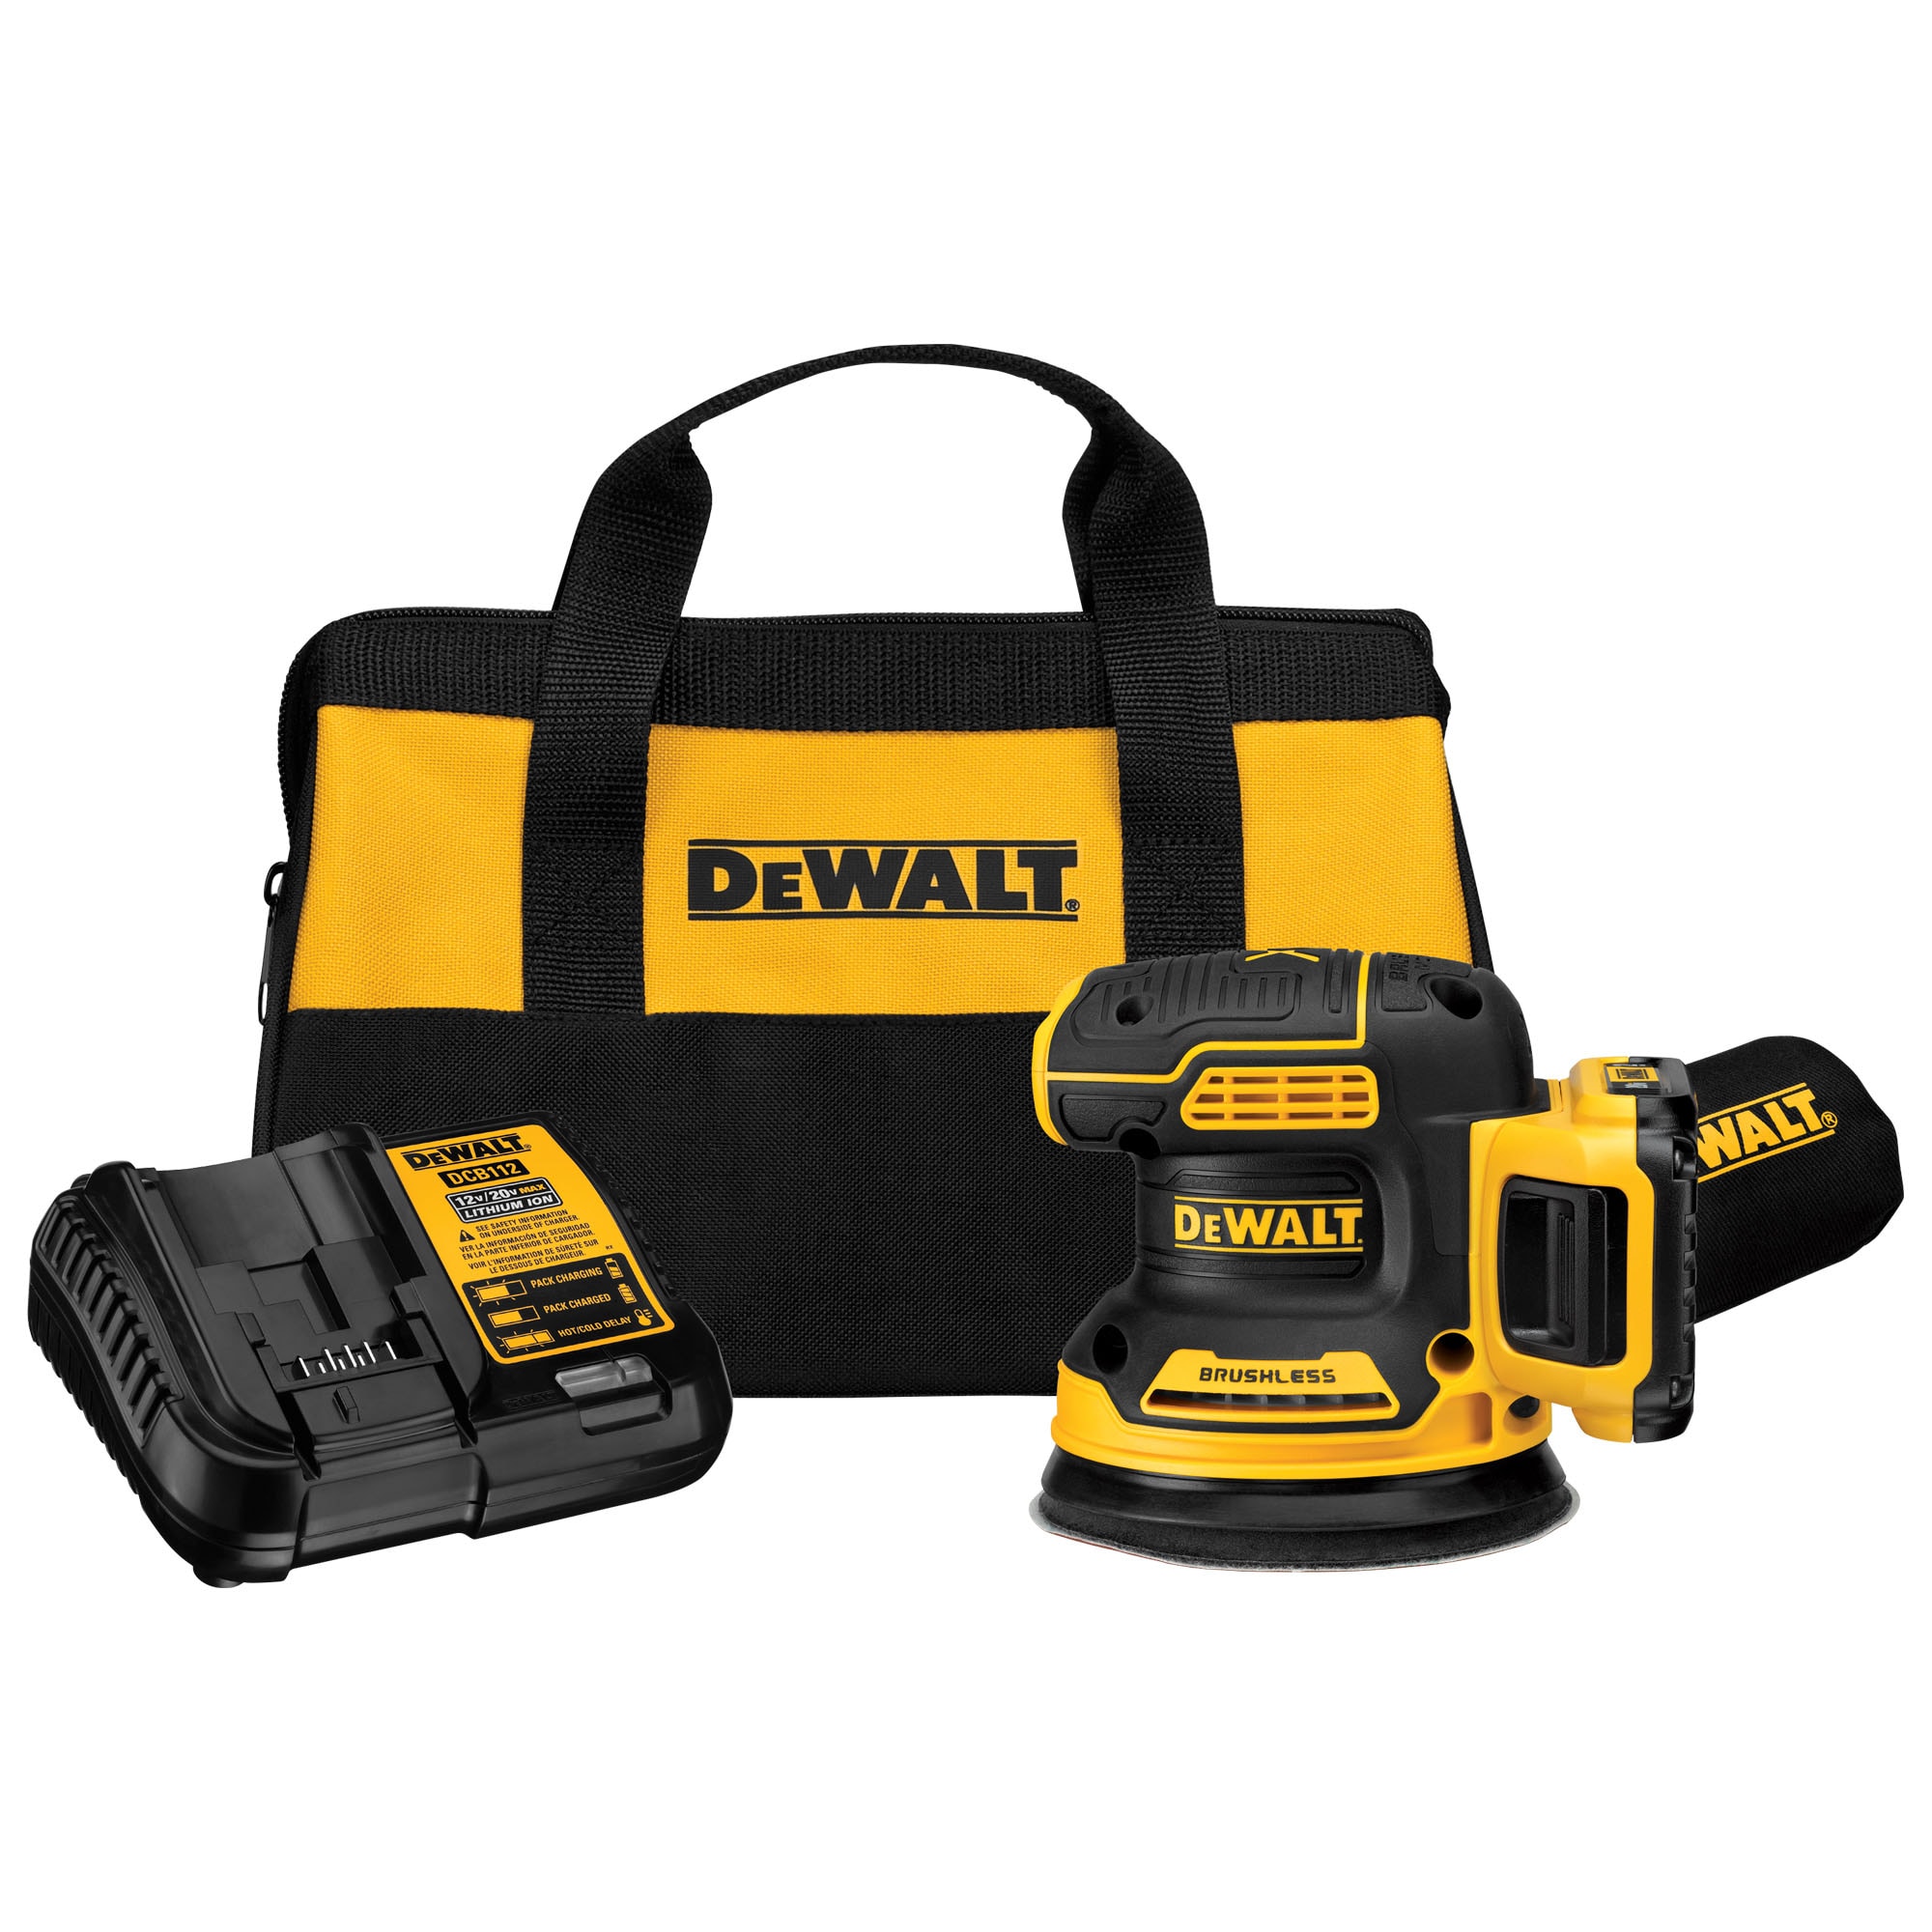 DEWALT Brushless Cordless Variable Speed Random Orbital Sander with Dust Management Included) in the Power Sanders at Lowes.com